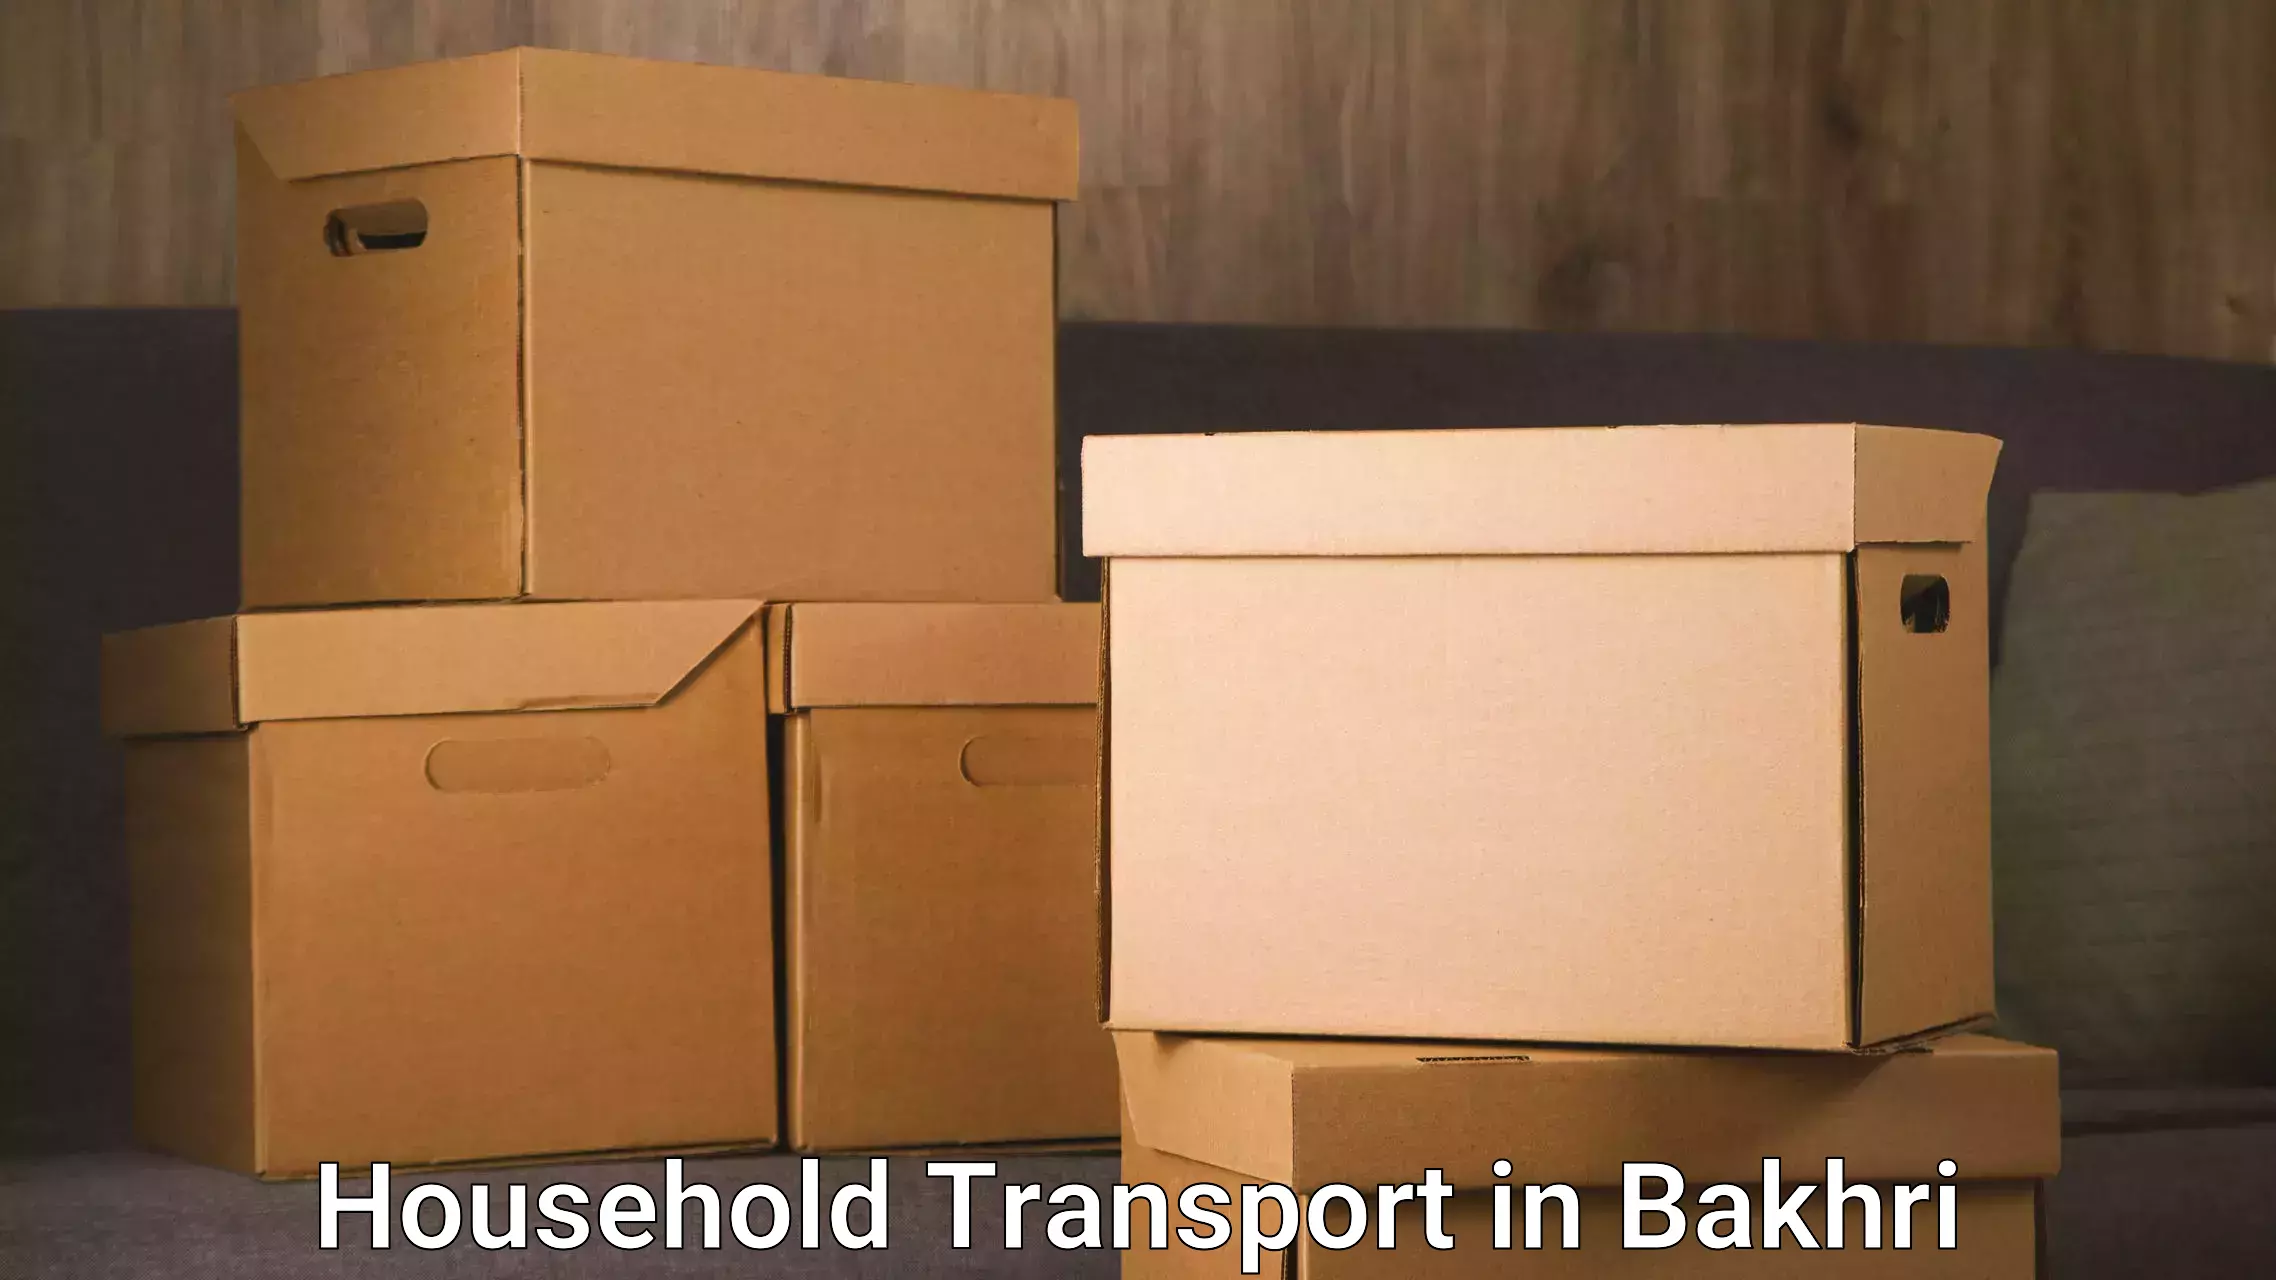 Quality relocation services in Bakhri